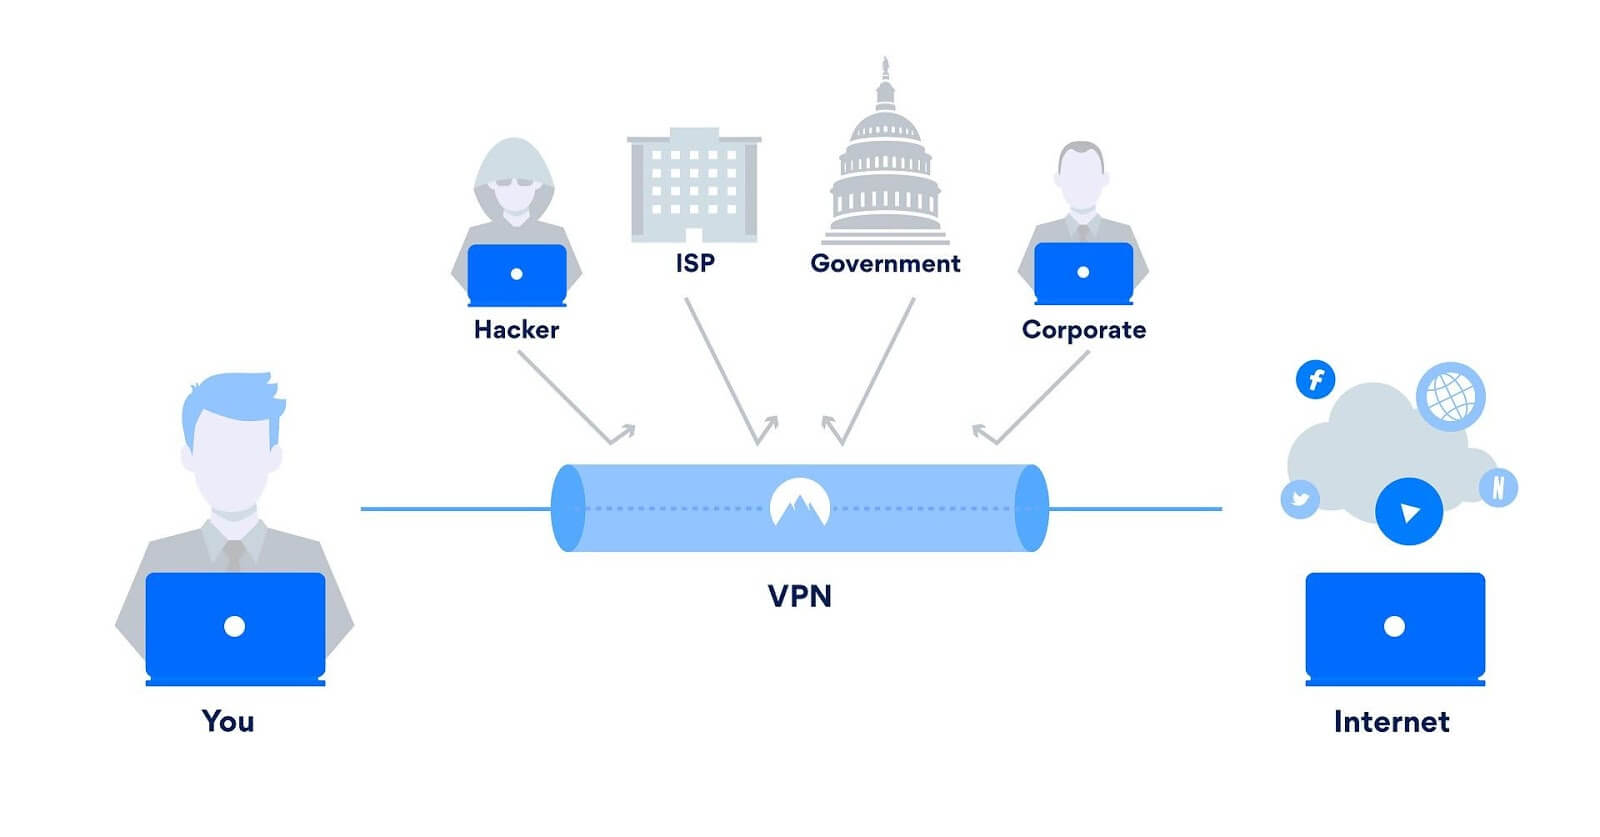 access local network over vpn